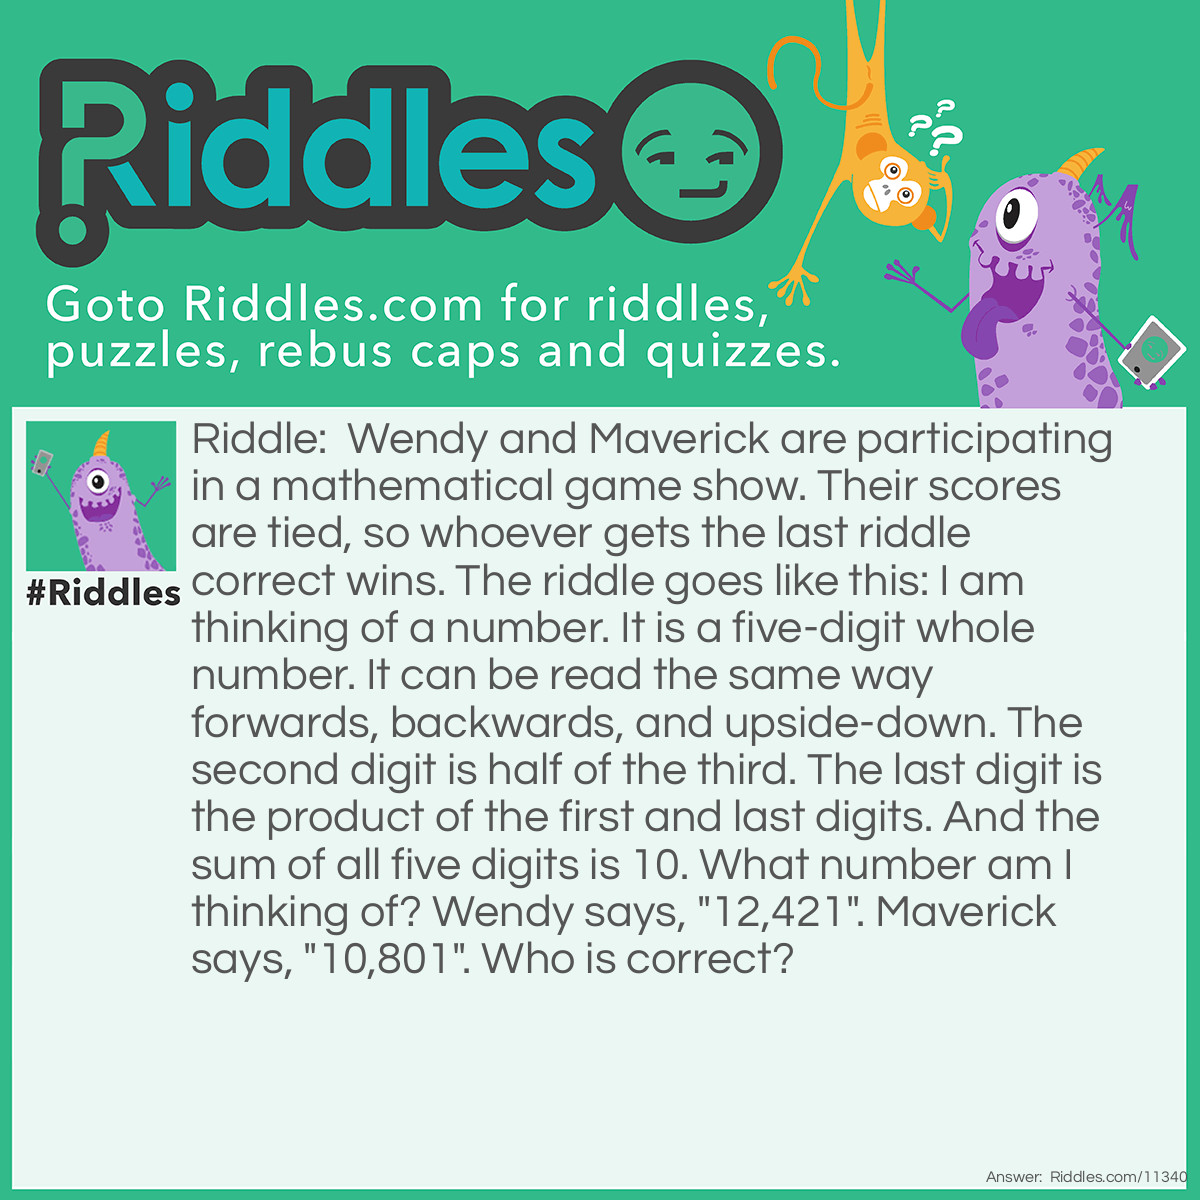 Riddle: Wendy and Maverick are participating in a mathematical game show. Their scores are tied, so whoever gets the last riddle correct wins. The riddle goes like this: I am thinking of a number. It is a five-digit whole number. It can be read the same way forwards, backwards, and upside-down. The second digit is half of the third. The last digit is the product of the first and last digits. And the sum of all five digits is 10. What number am I thinking of? Wendy says, "12,421". Maverick says, "10,801". Who is correct? Answer: Maverick is correct. The number is 10,801. This is why: Both numbers meet most of the requirements, but 12421 does not meet the second requirement because it CANNOT be read the same way upside-down as right-side-up. Many think 10801 does not meet the third requirement, but 0 CAN be half of 8 if you cut 8 in half horizontally. This way, you will get two zeros, and 10801 DOES meet the third requirement. Since only 10801 meets all the requirements, it is the correct answer, and Maverick is right!